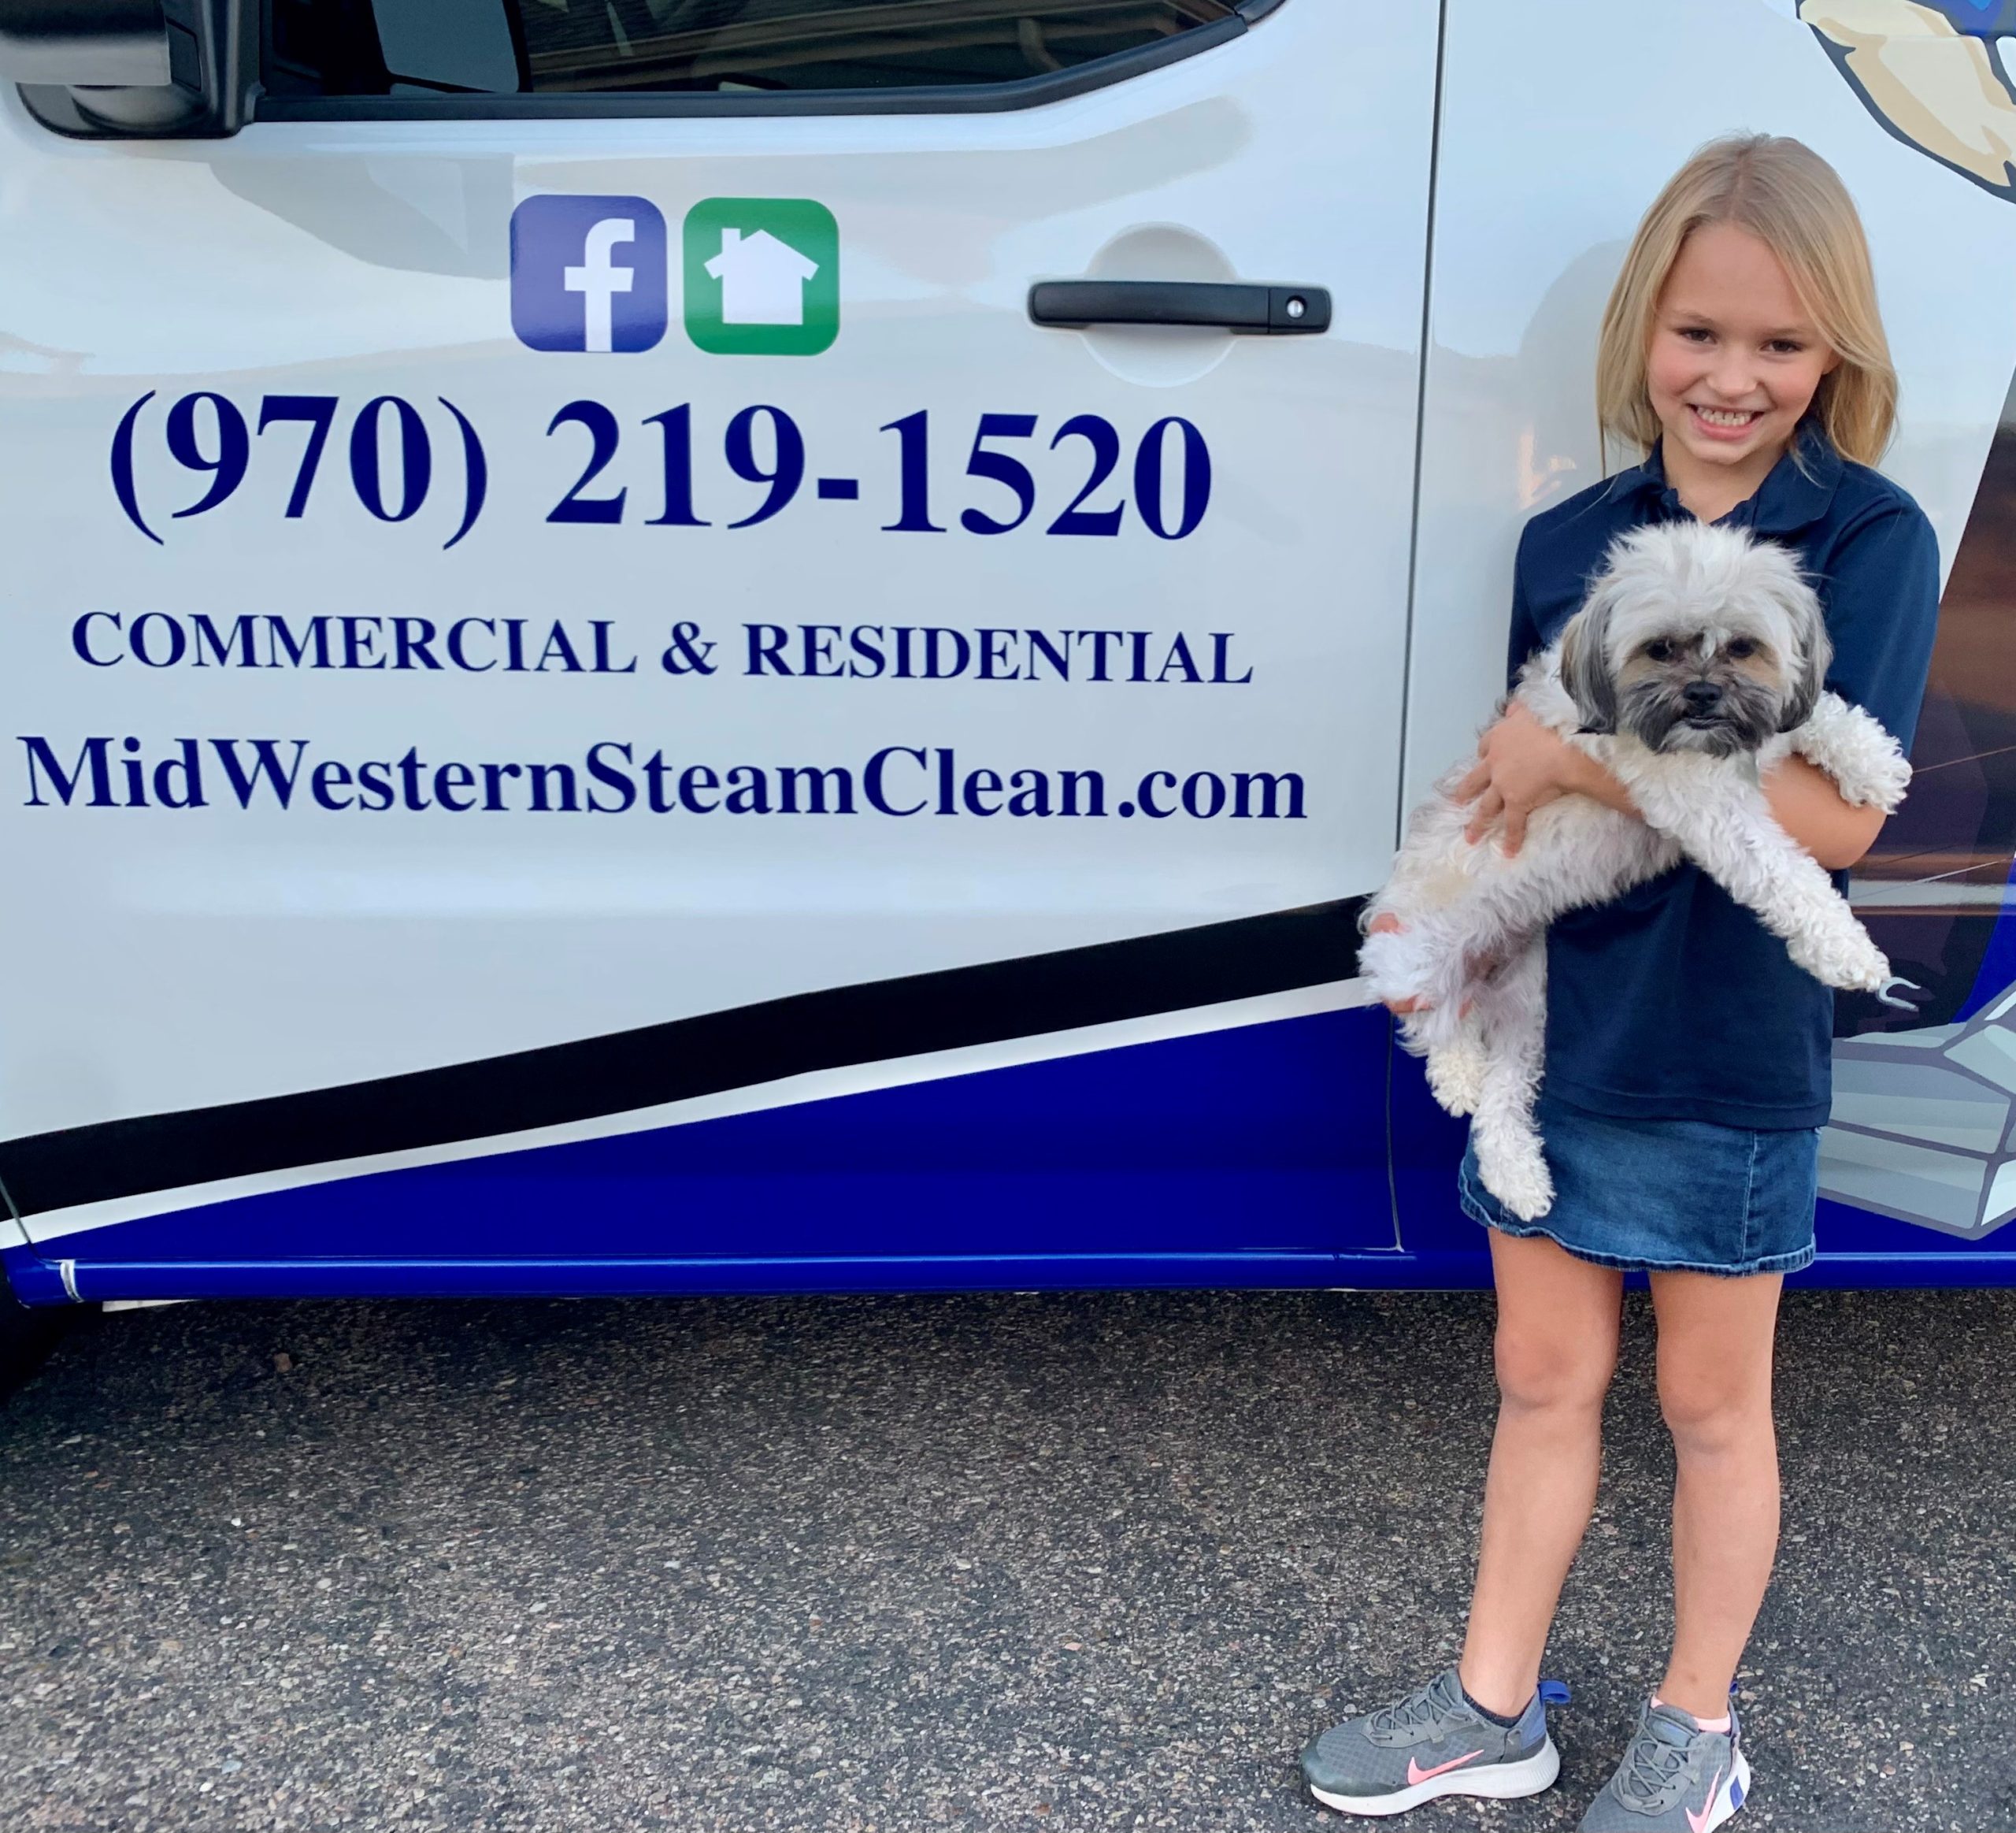 Midwestern Steam Clean van with girl and puppy